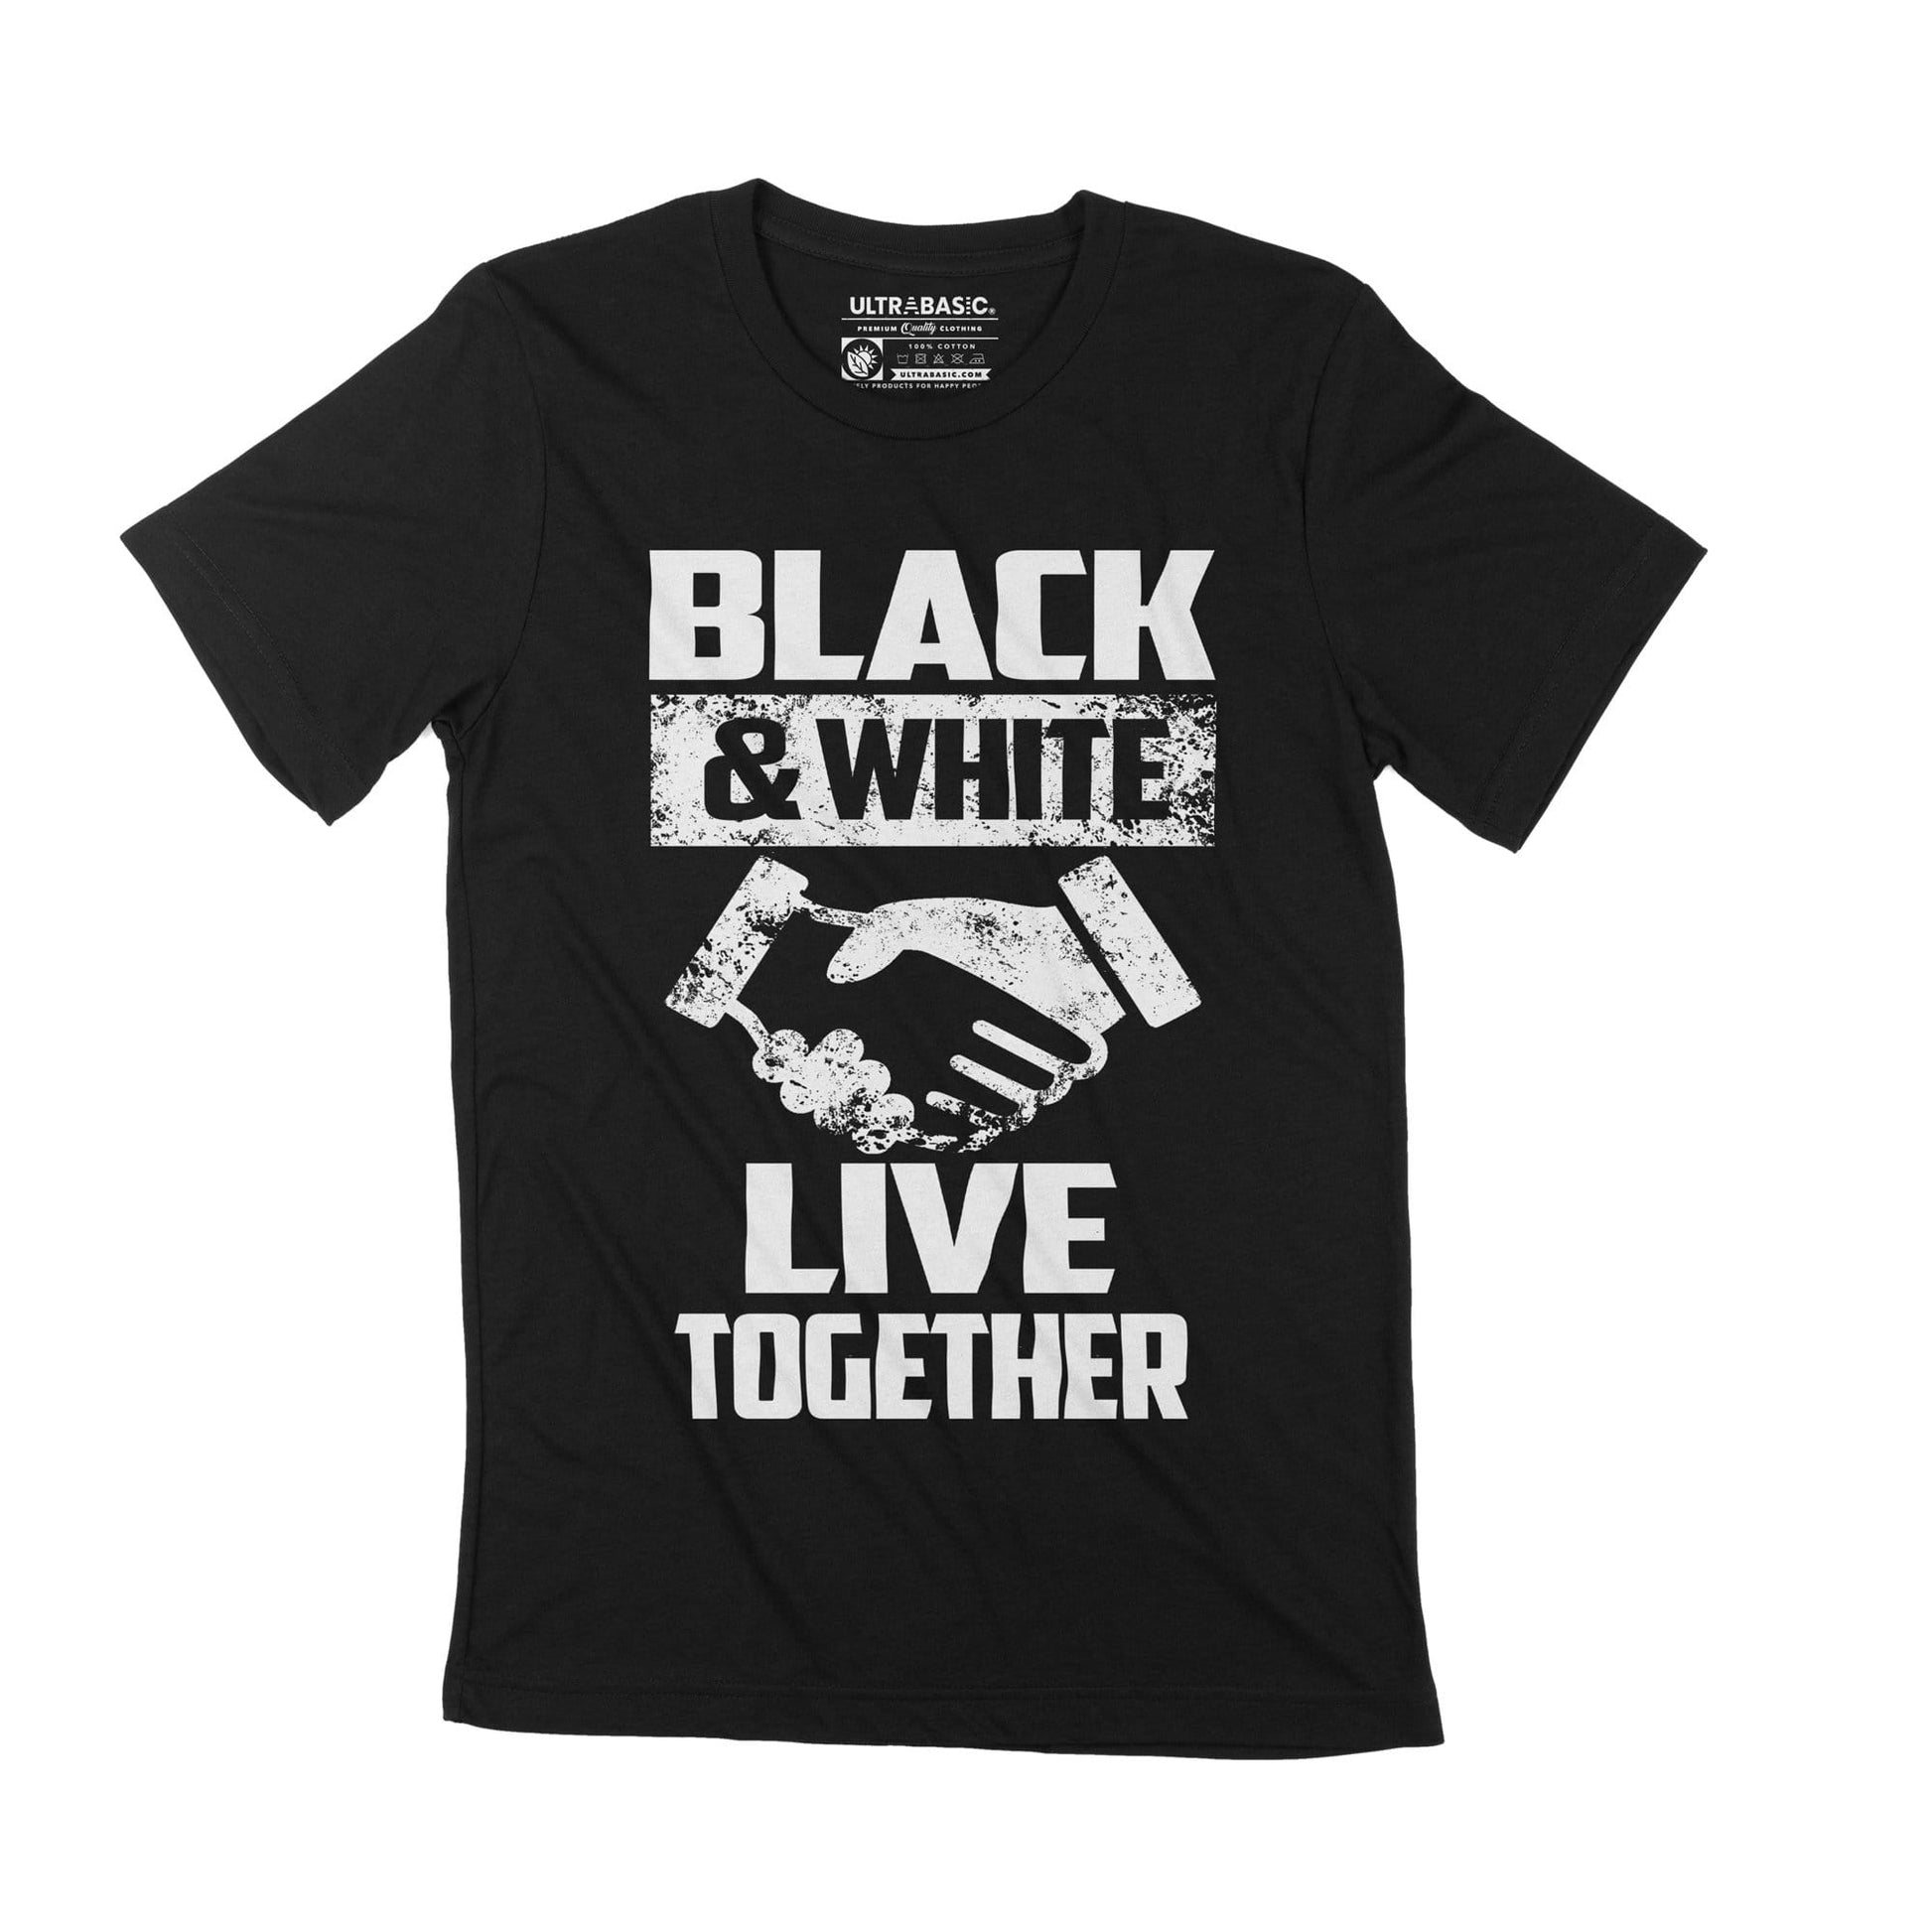 george floyd i cant breathe blm movement revolution tshirt police brutality protest shirt love no hate tees support kindness respect us equal rights freedom equality no racism anti racist solidarity civil right say their names silence is violence